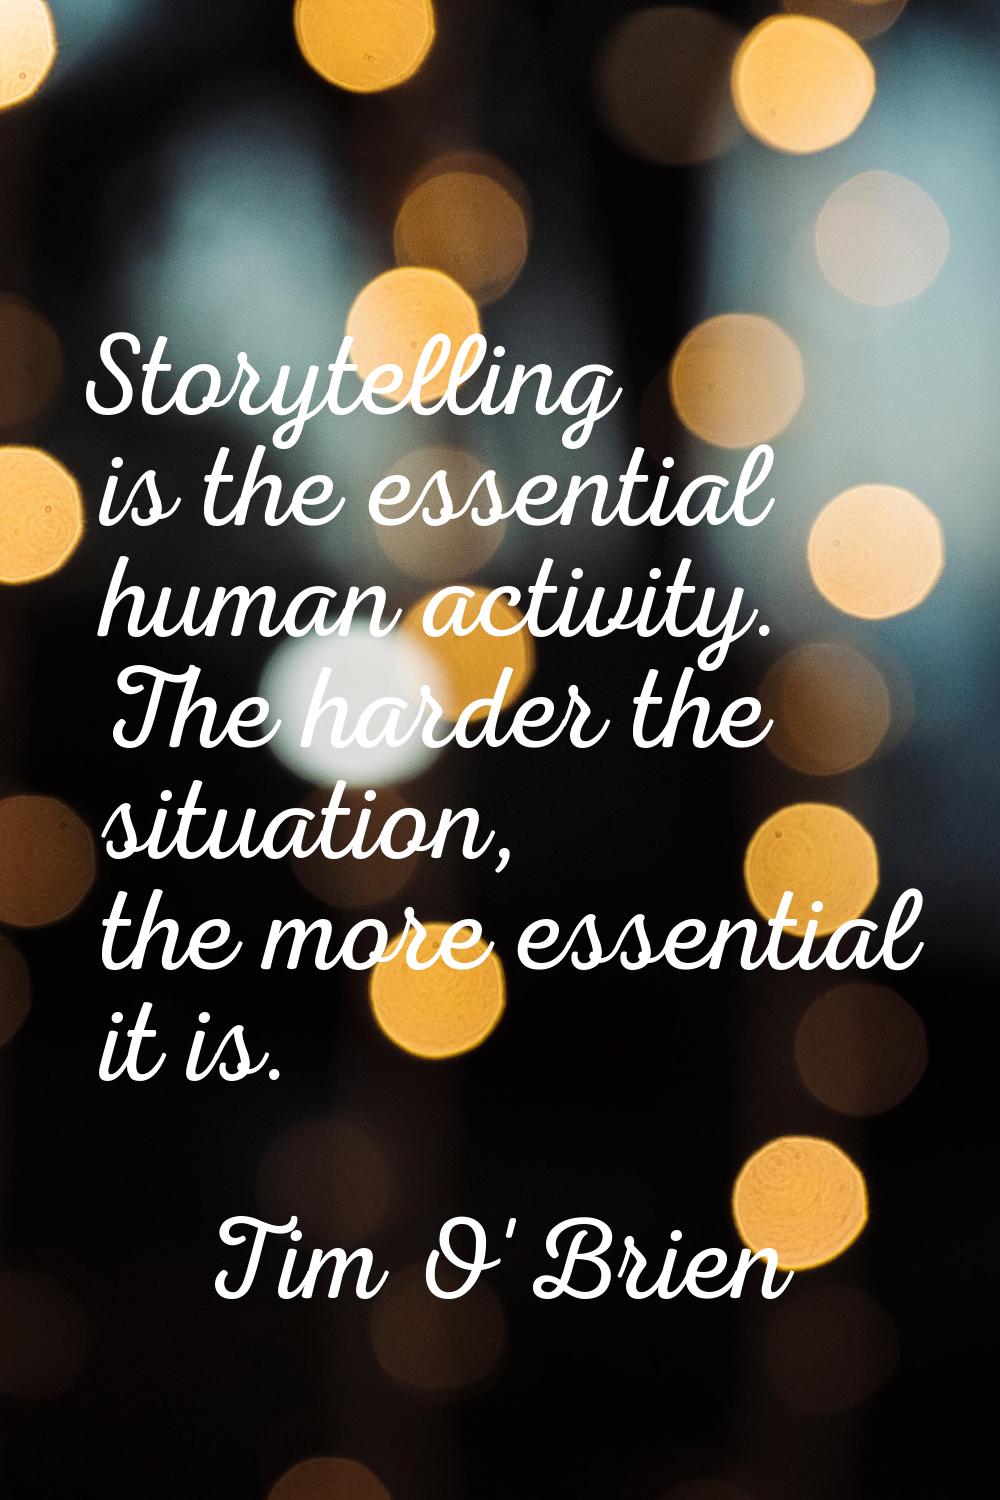 Storytelling is the essential human activity. The harder the situation, the more essential it is.